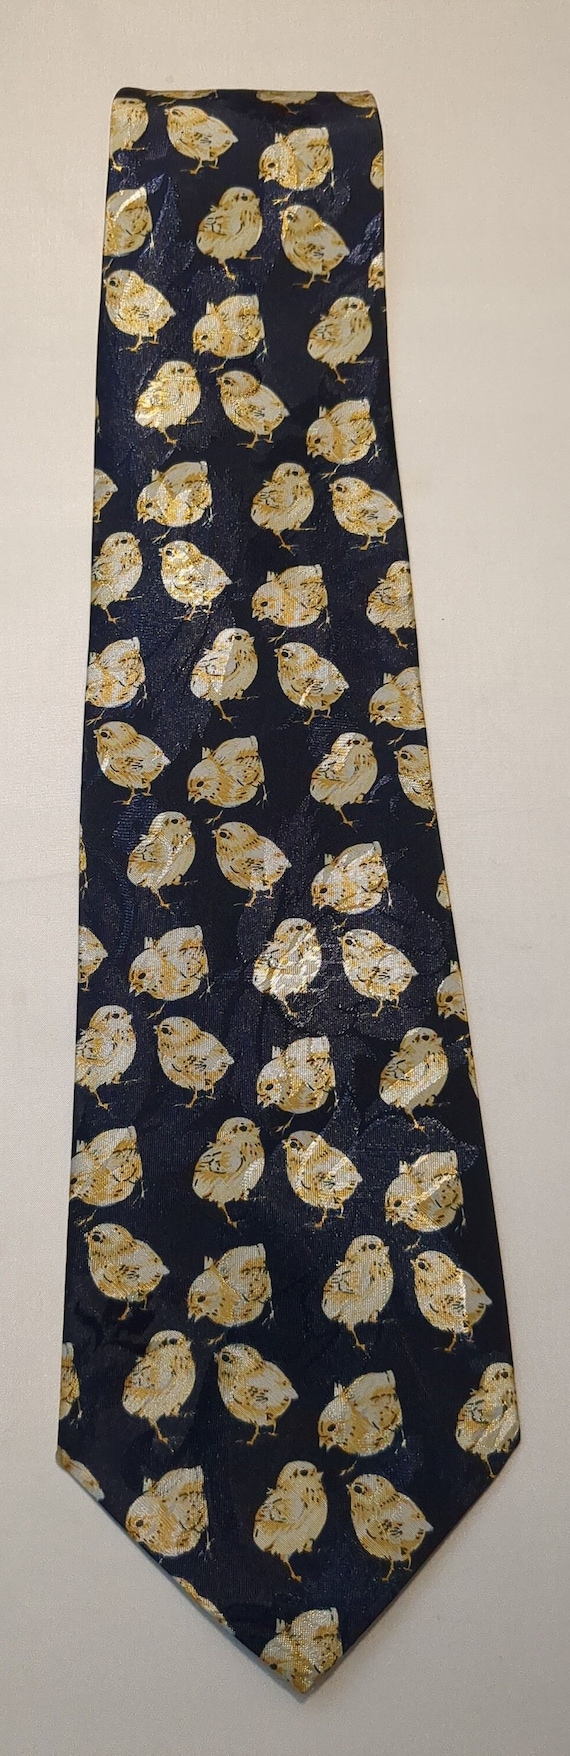 Black Necktie Covered with Baby "Chicks" a Subtle… - image 3